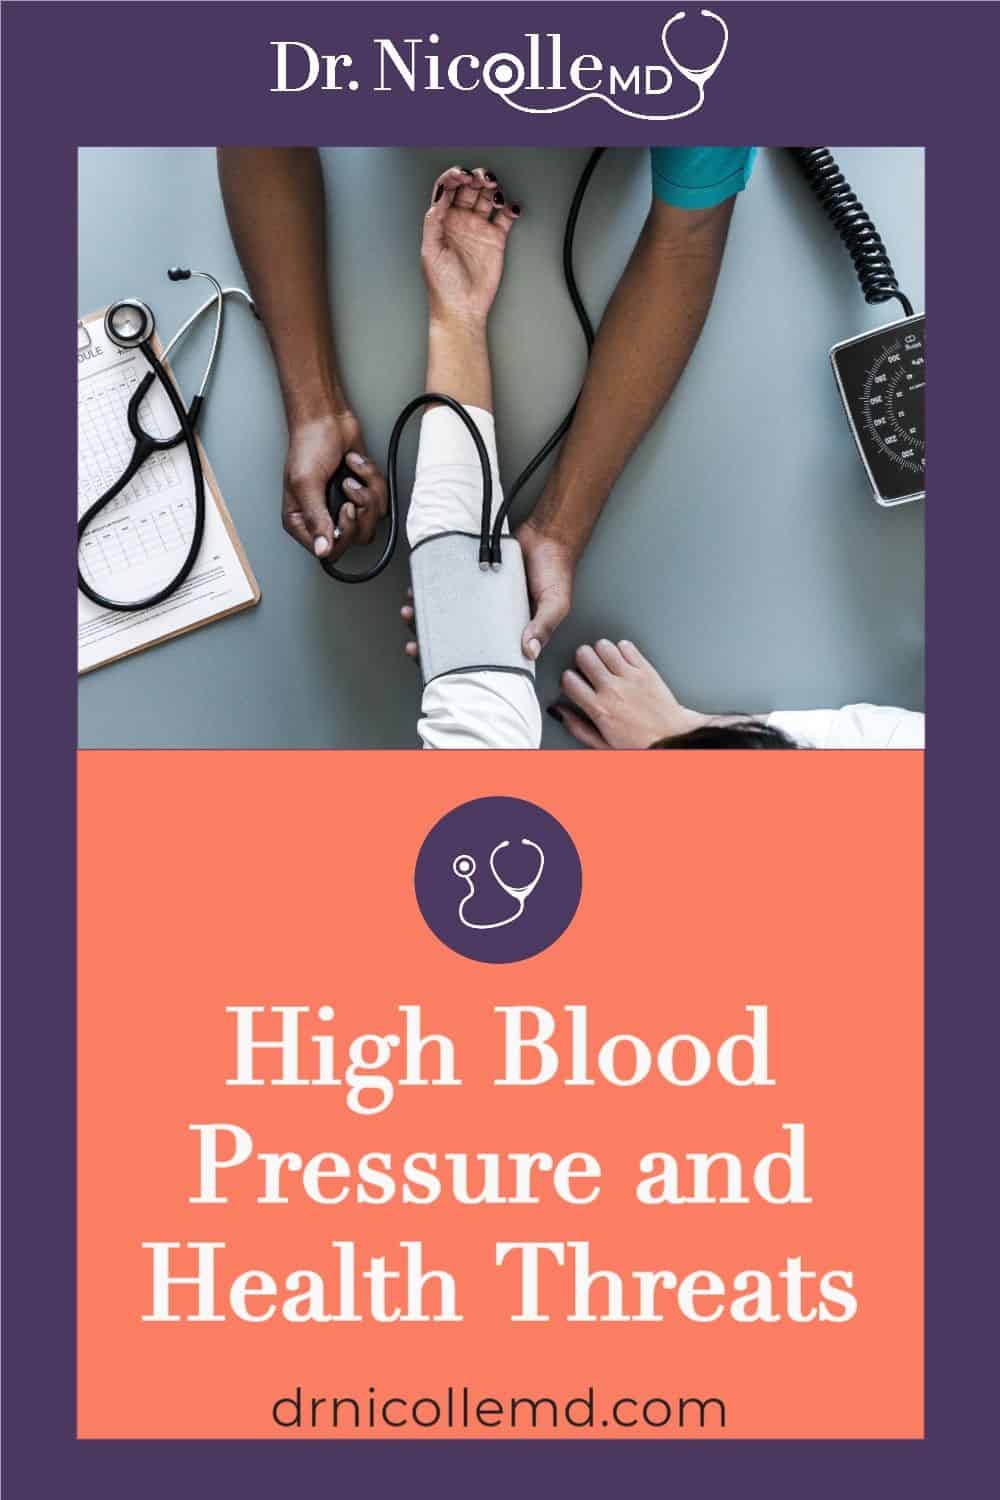 The Dangers Of High Blood Pressure